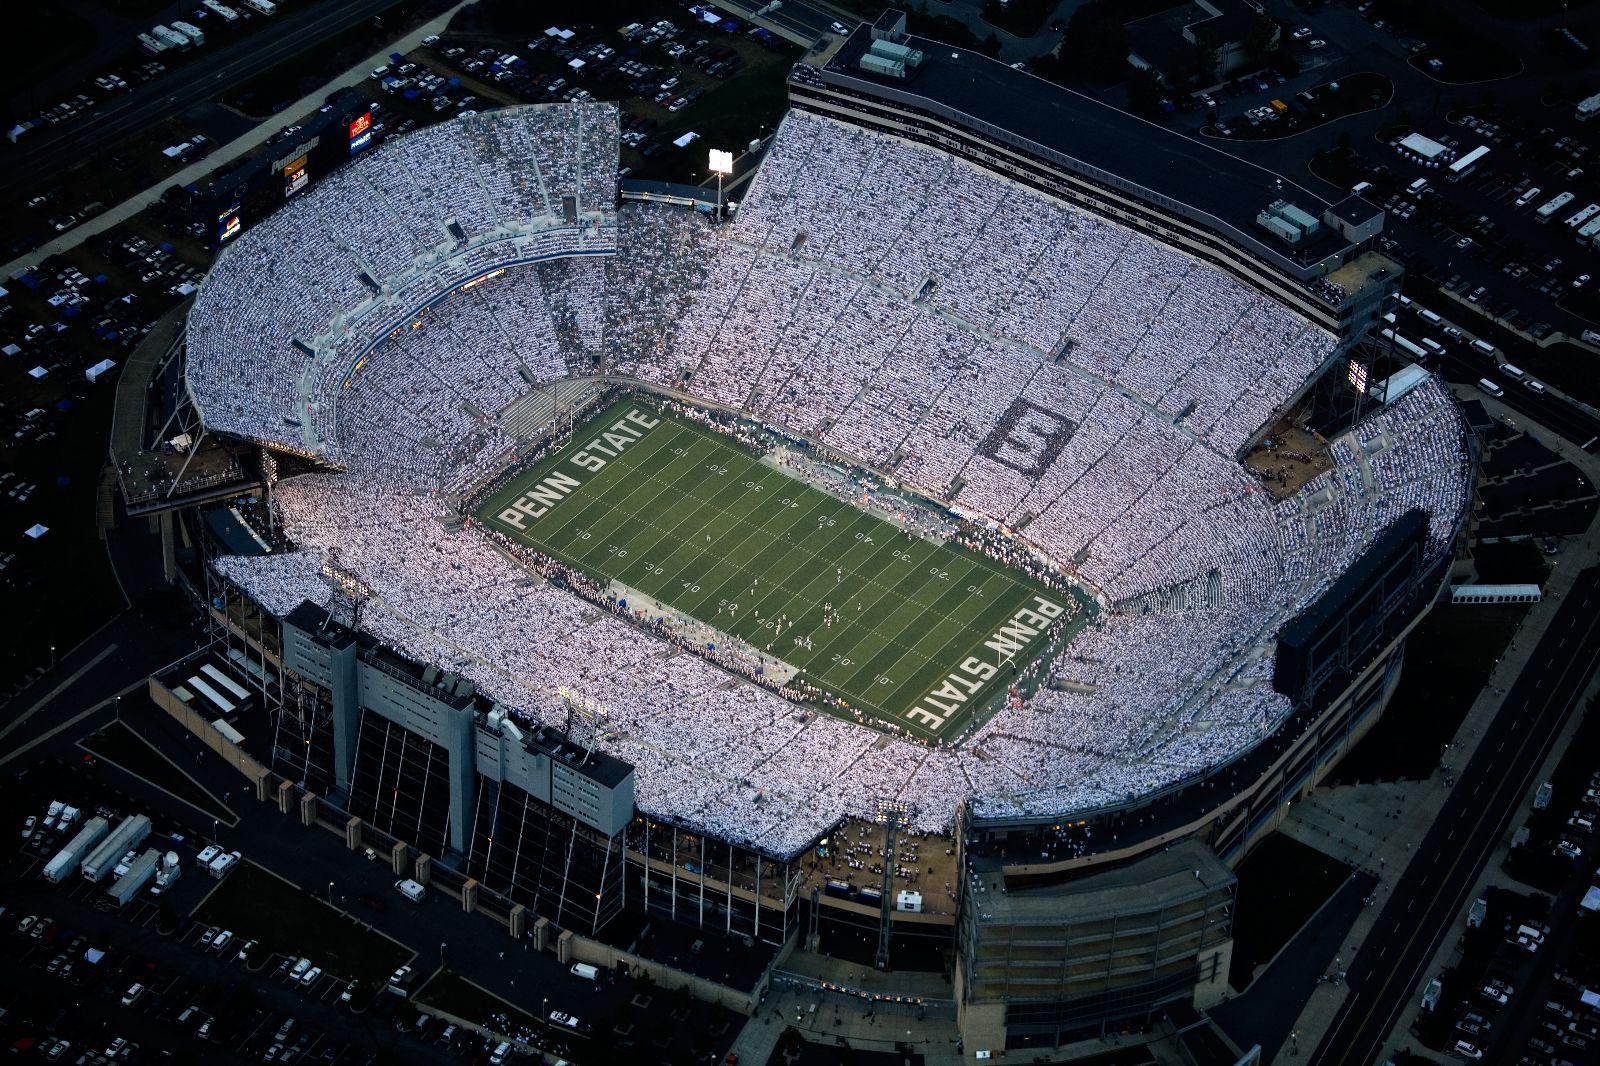 Penn State Beaver Stadium of the Nittany Lions Out